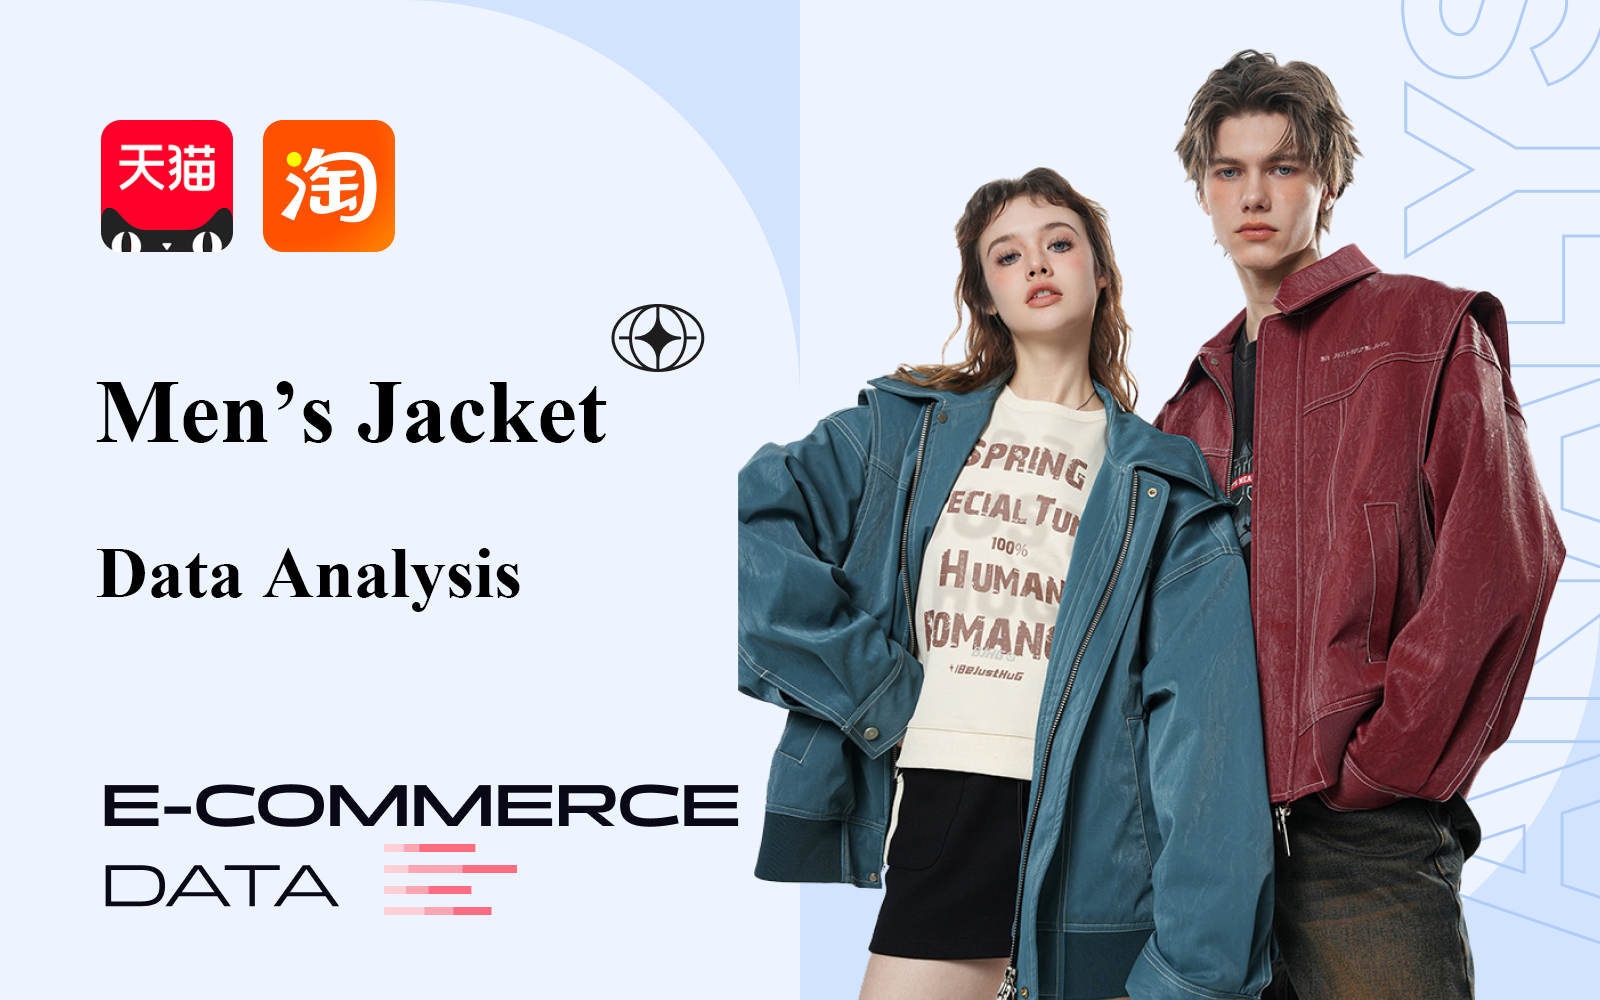 Jackets -- The Data Analysis of E-Commerce Menswear